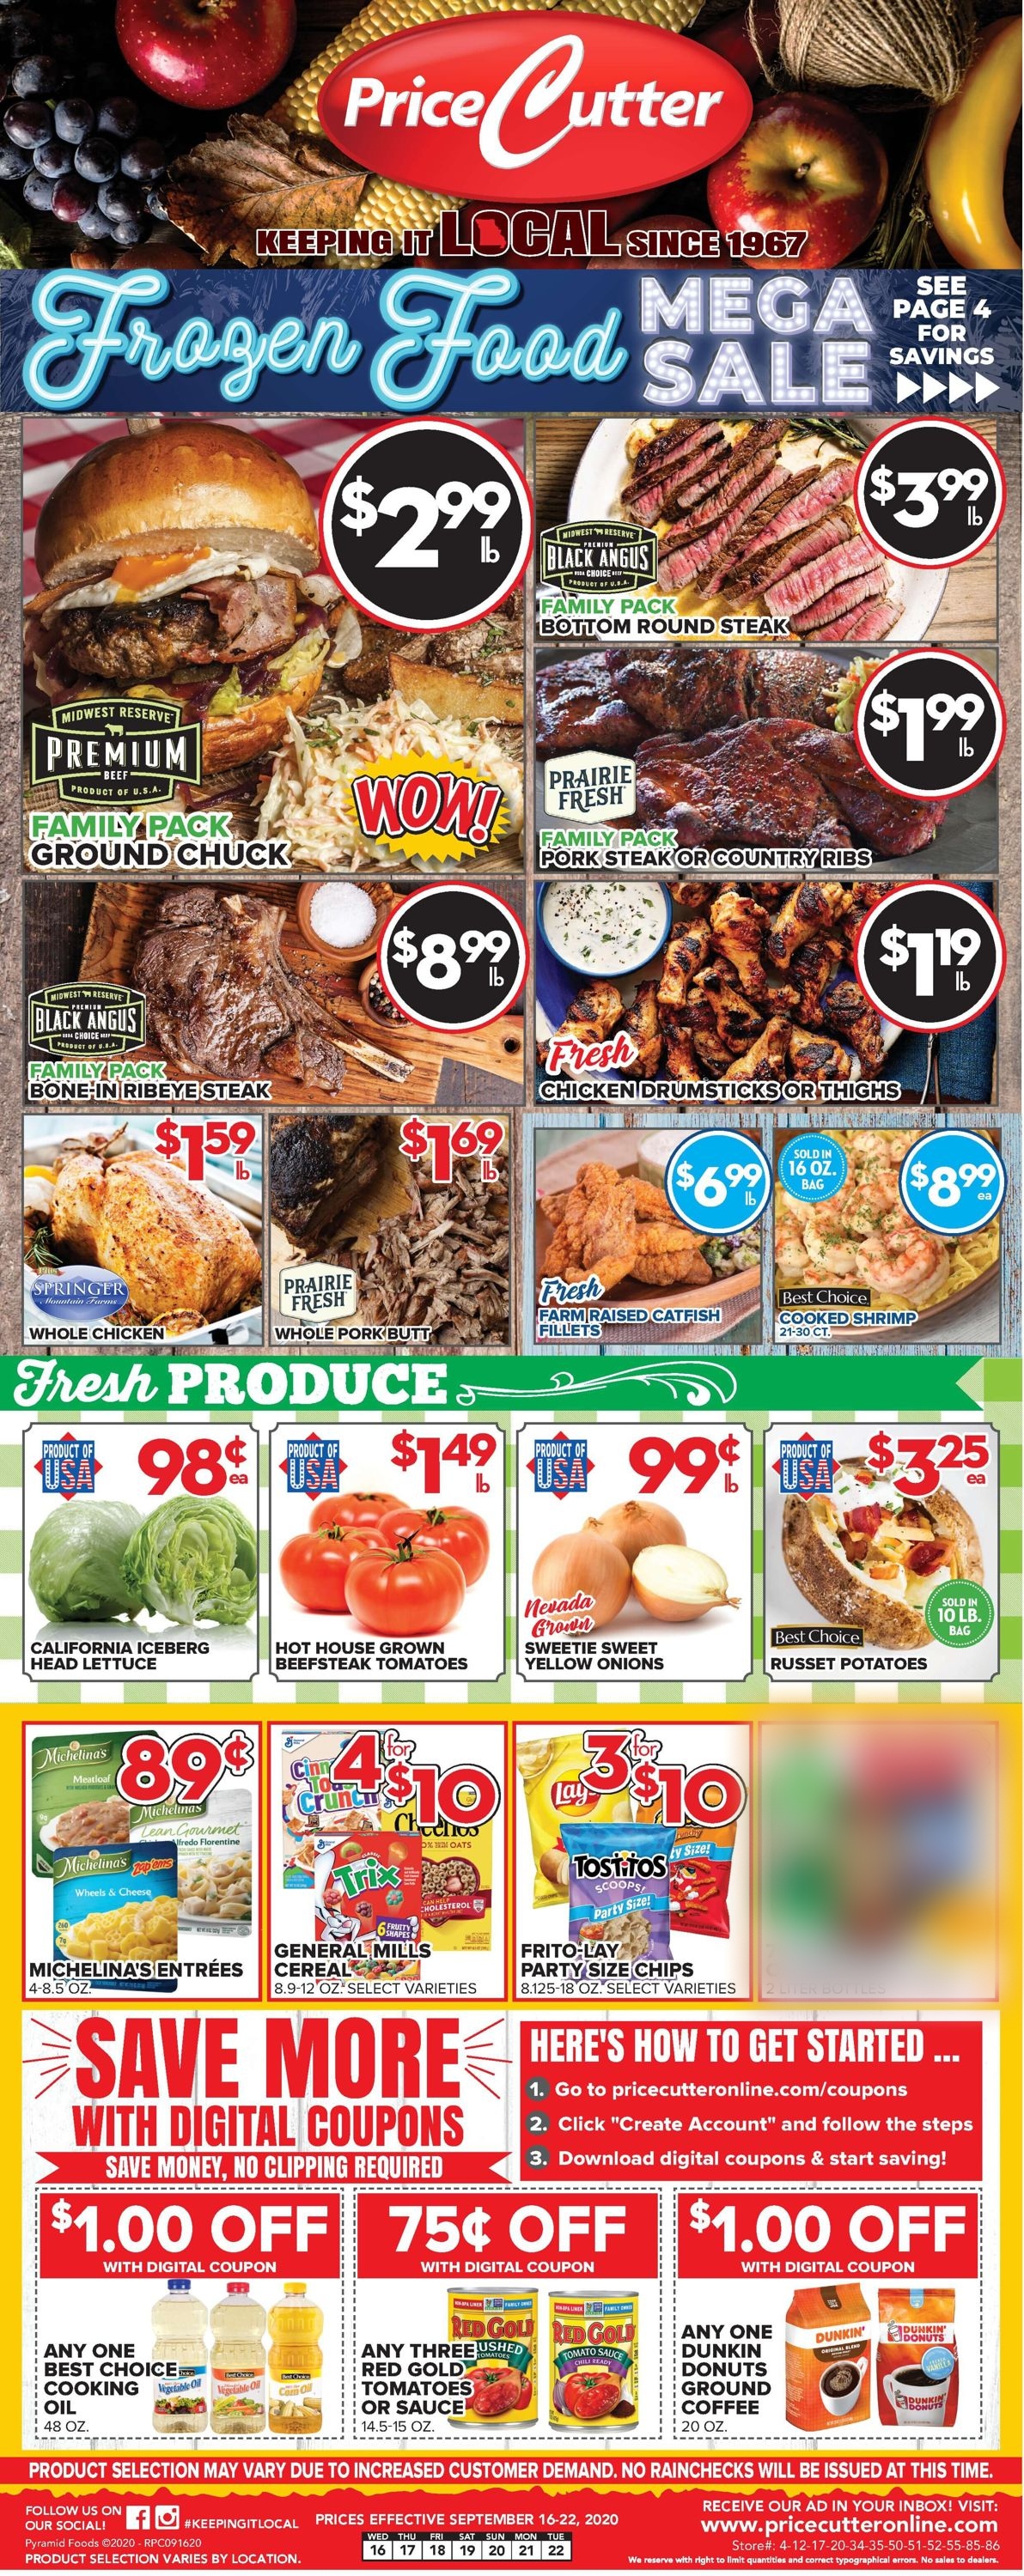 Price Cutter Weekly Ad Circular - valid 09/16-09/22/2020